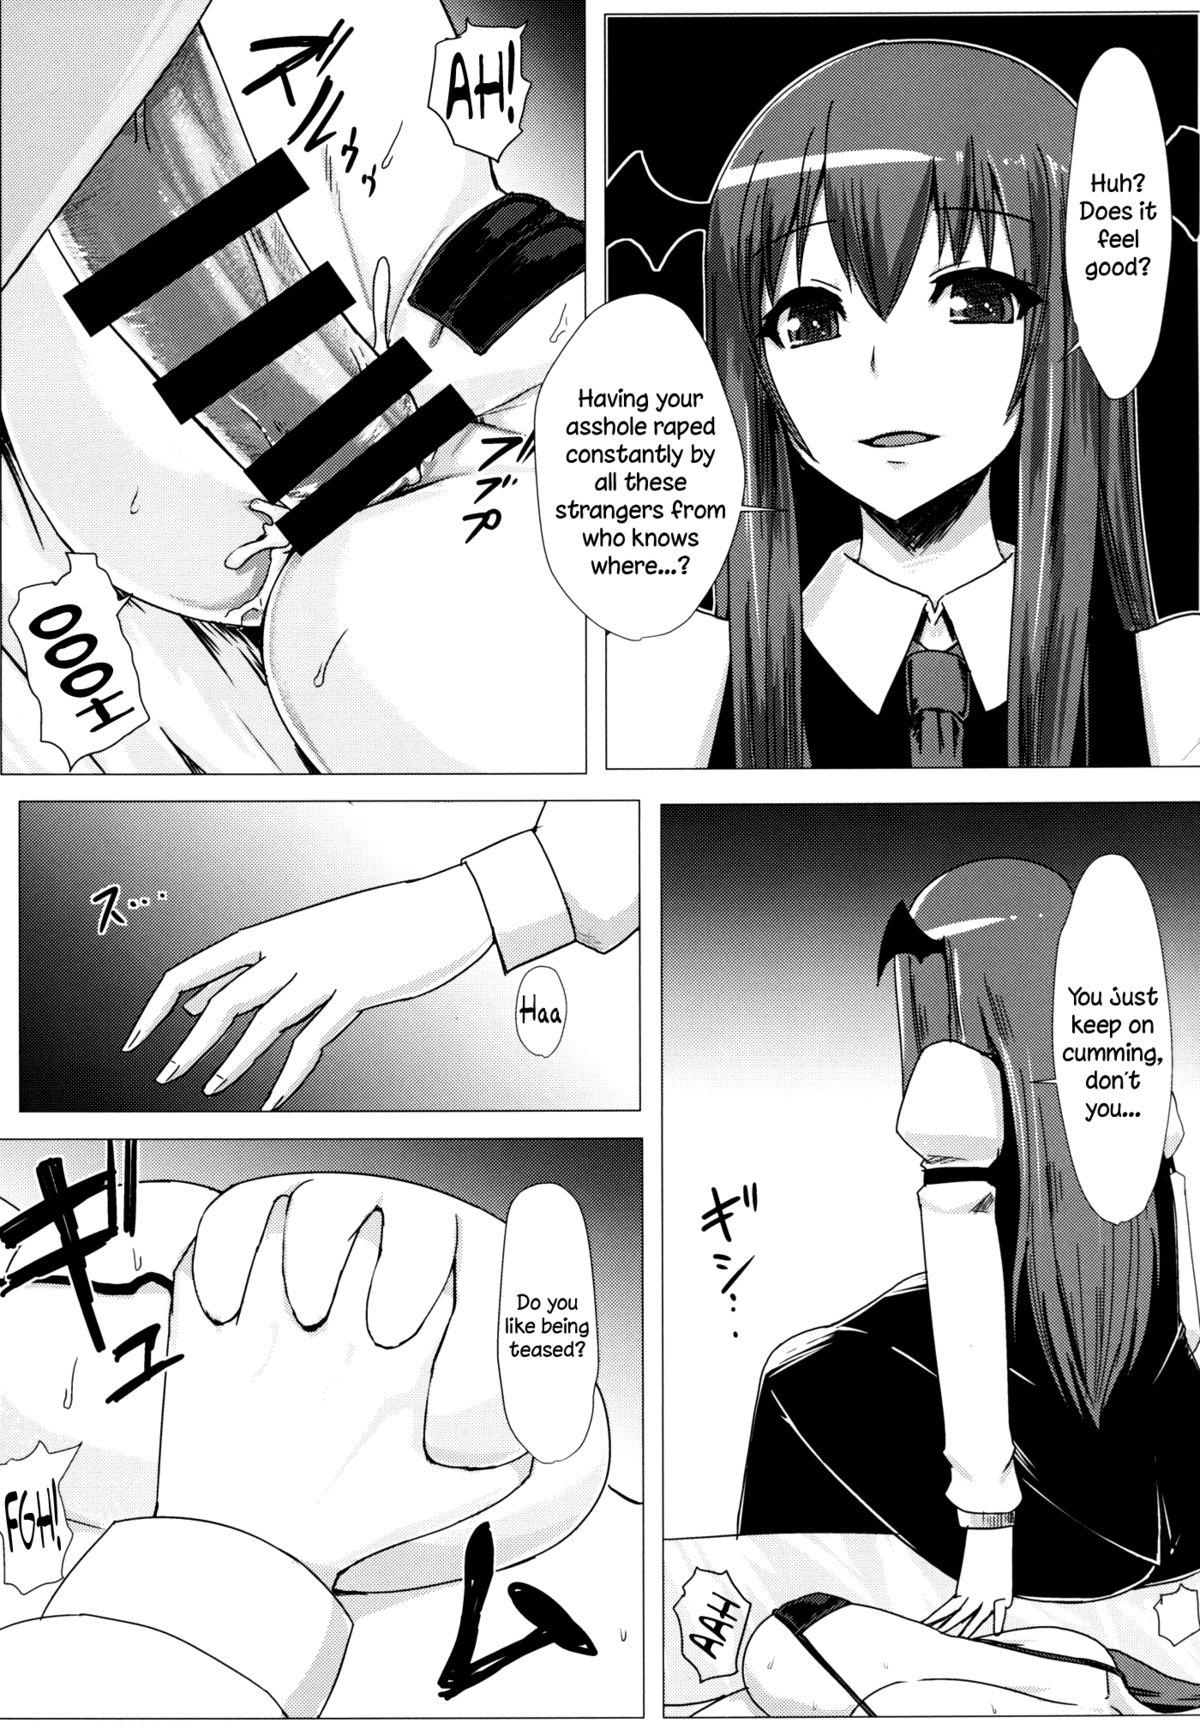 Naturaltits Shiri Pache Pache | Ass Patchy Patchy - Touhou project Super - Page 6